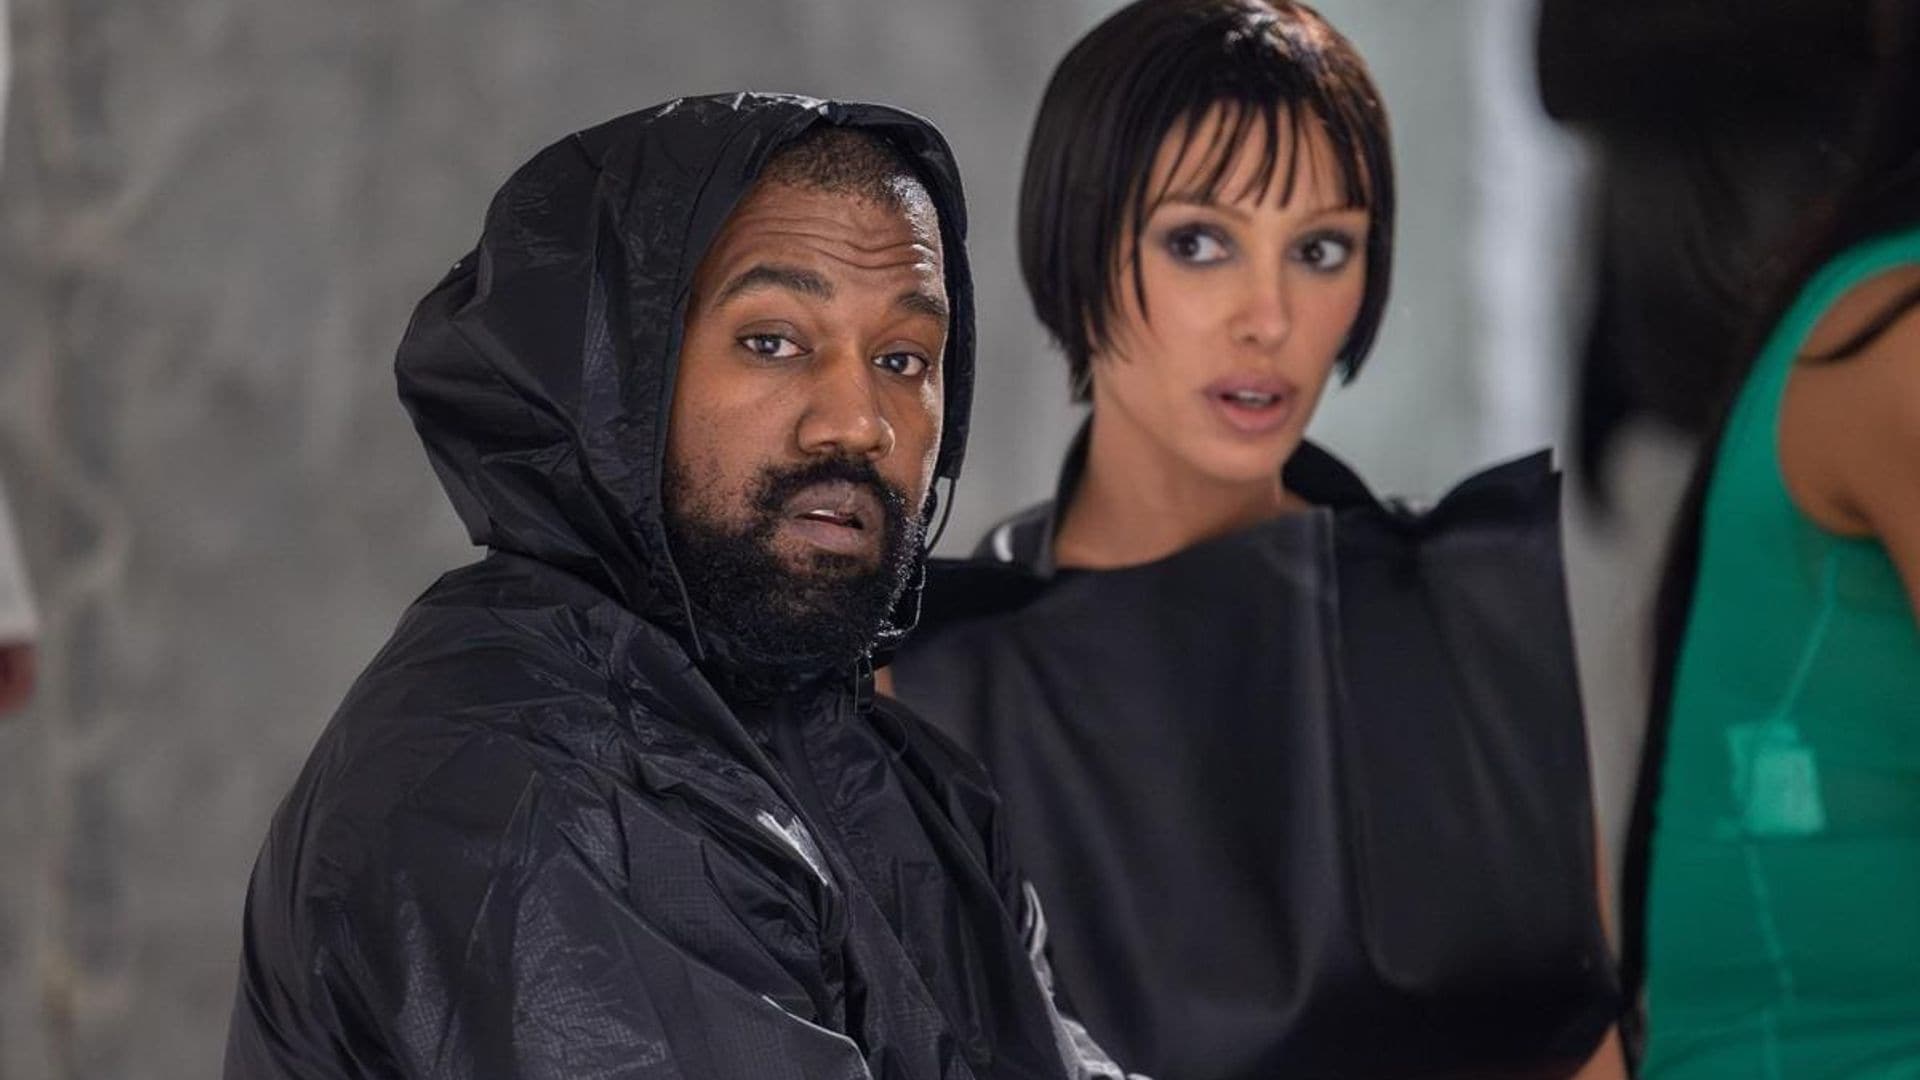 Bianca Censori and Kanye West spotted flying economy: Fans react